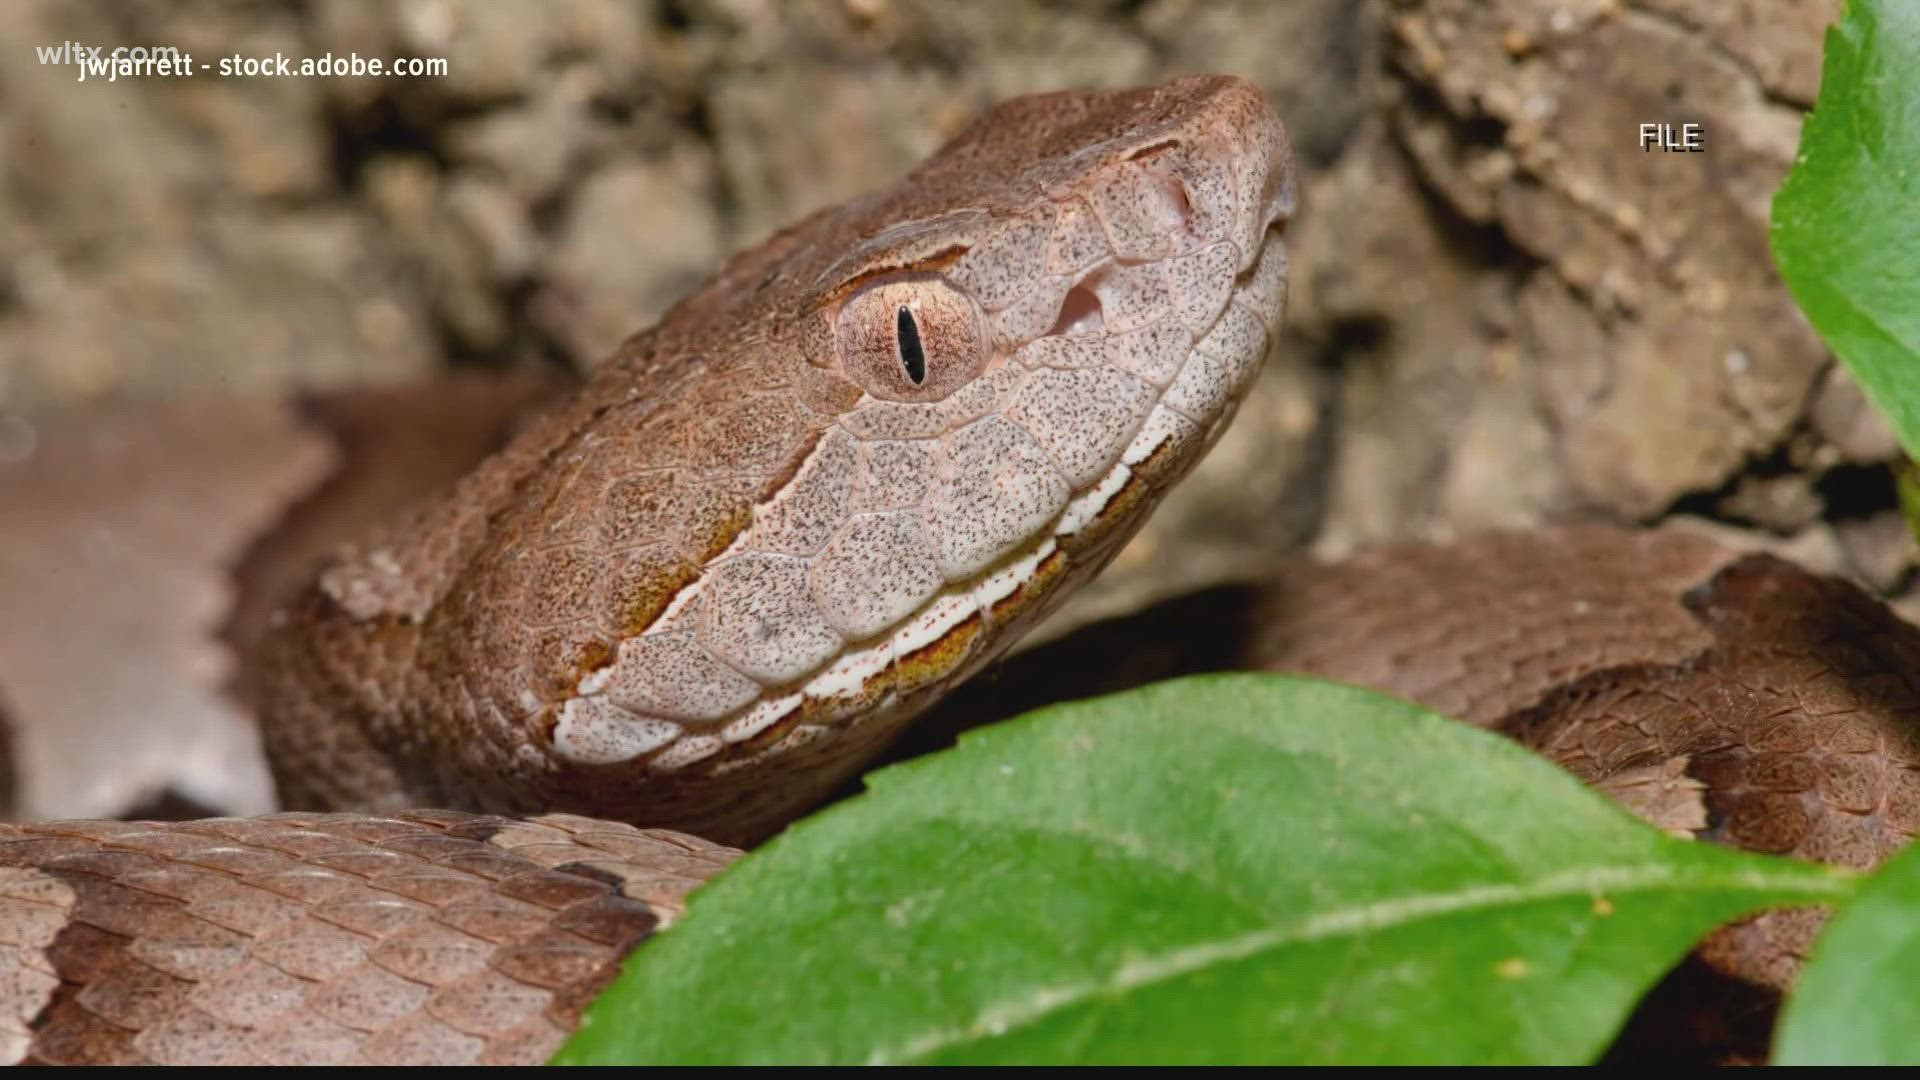 Venomous snake identification in South Carolina for snakes that can hide in plain sight like Copperheads. Be careful and call a professional to get rid of them.